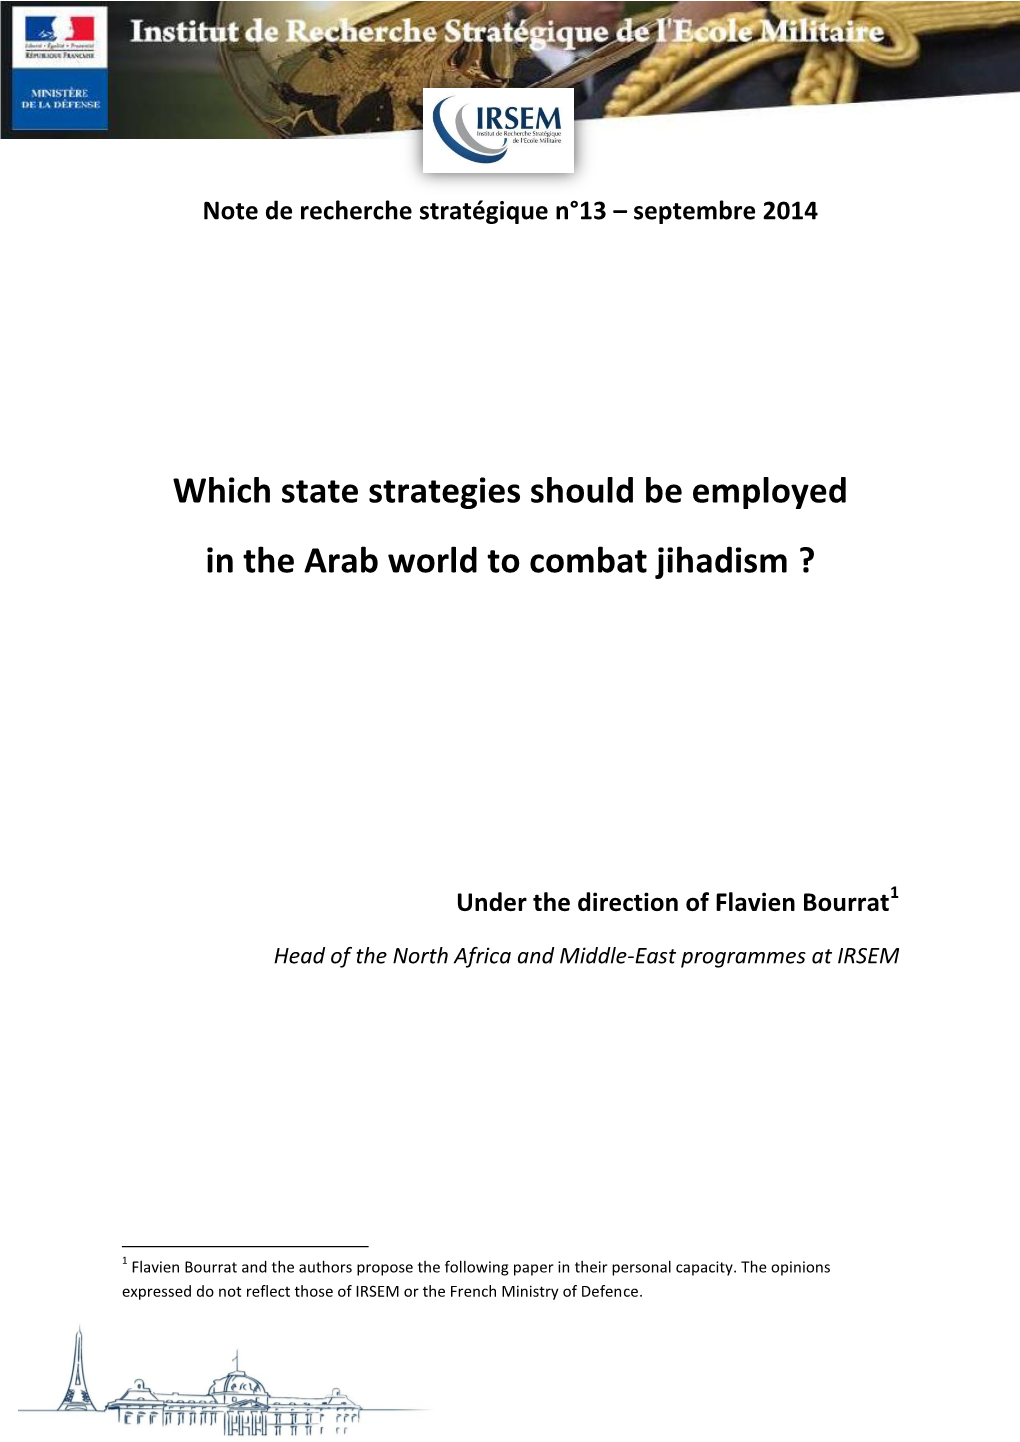 Which State Strategies Should Be Employed in the Arab World to Combat Jihadism ?